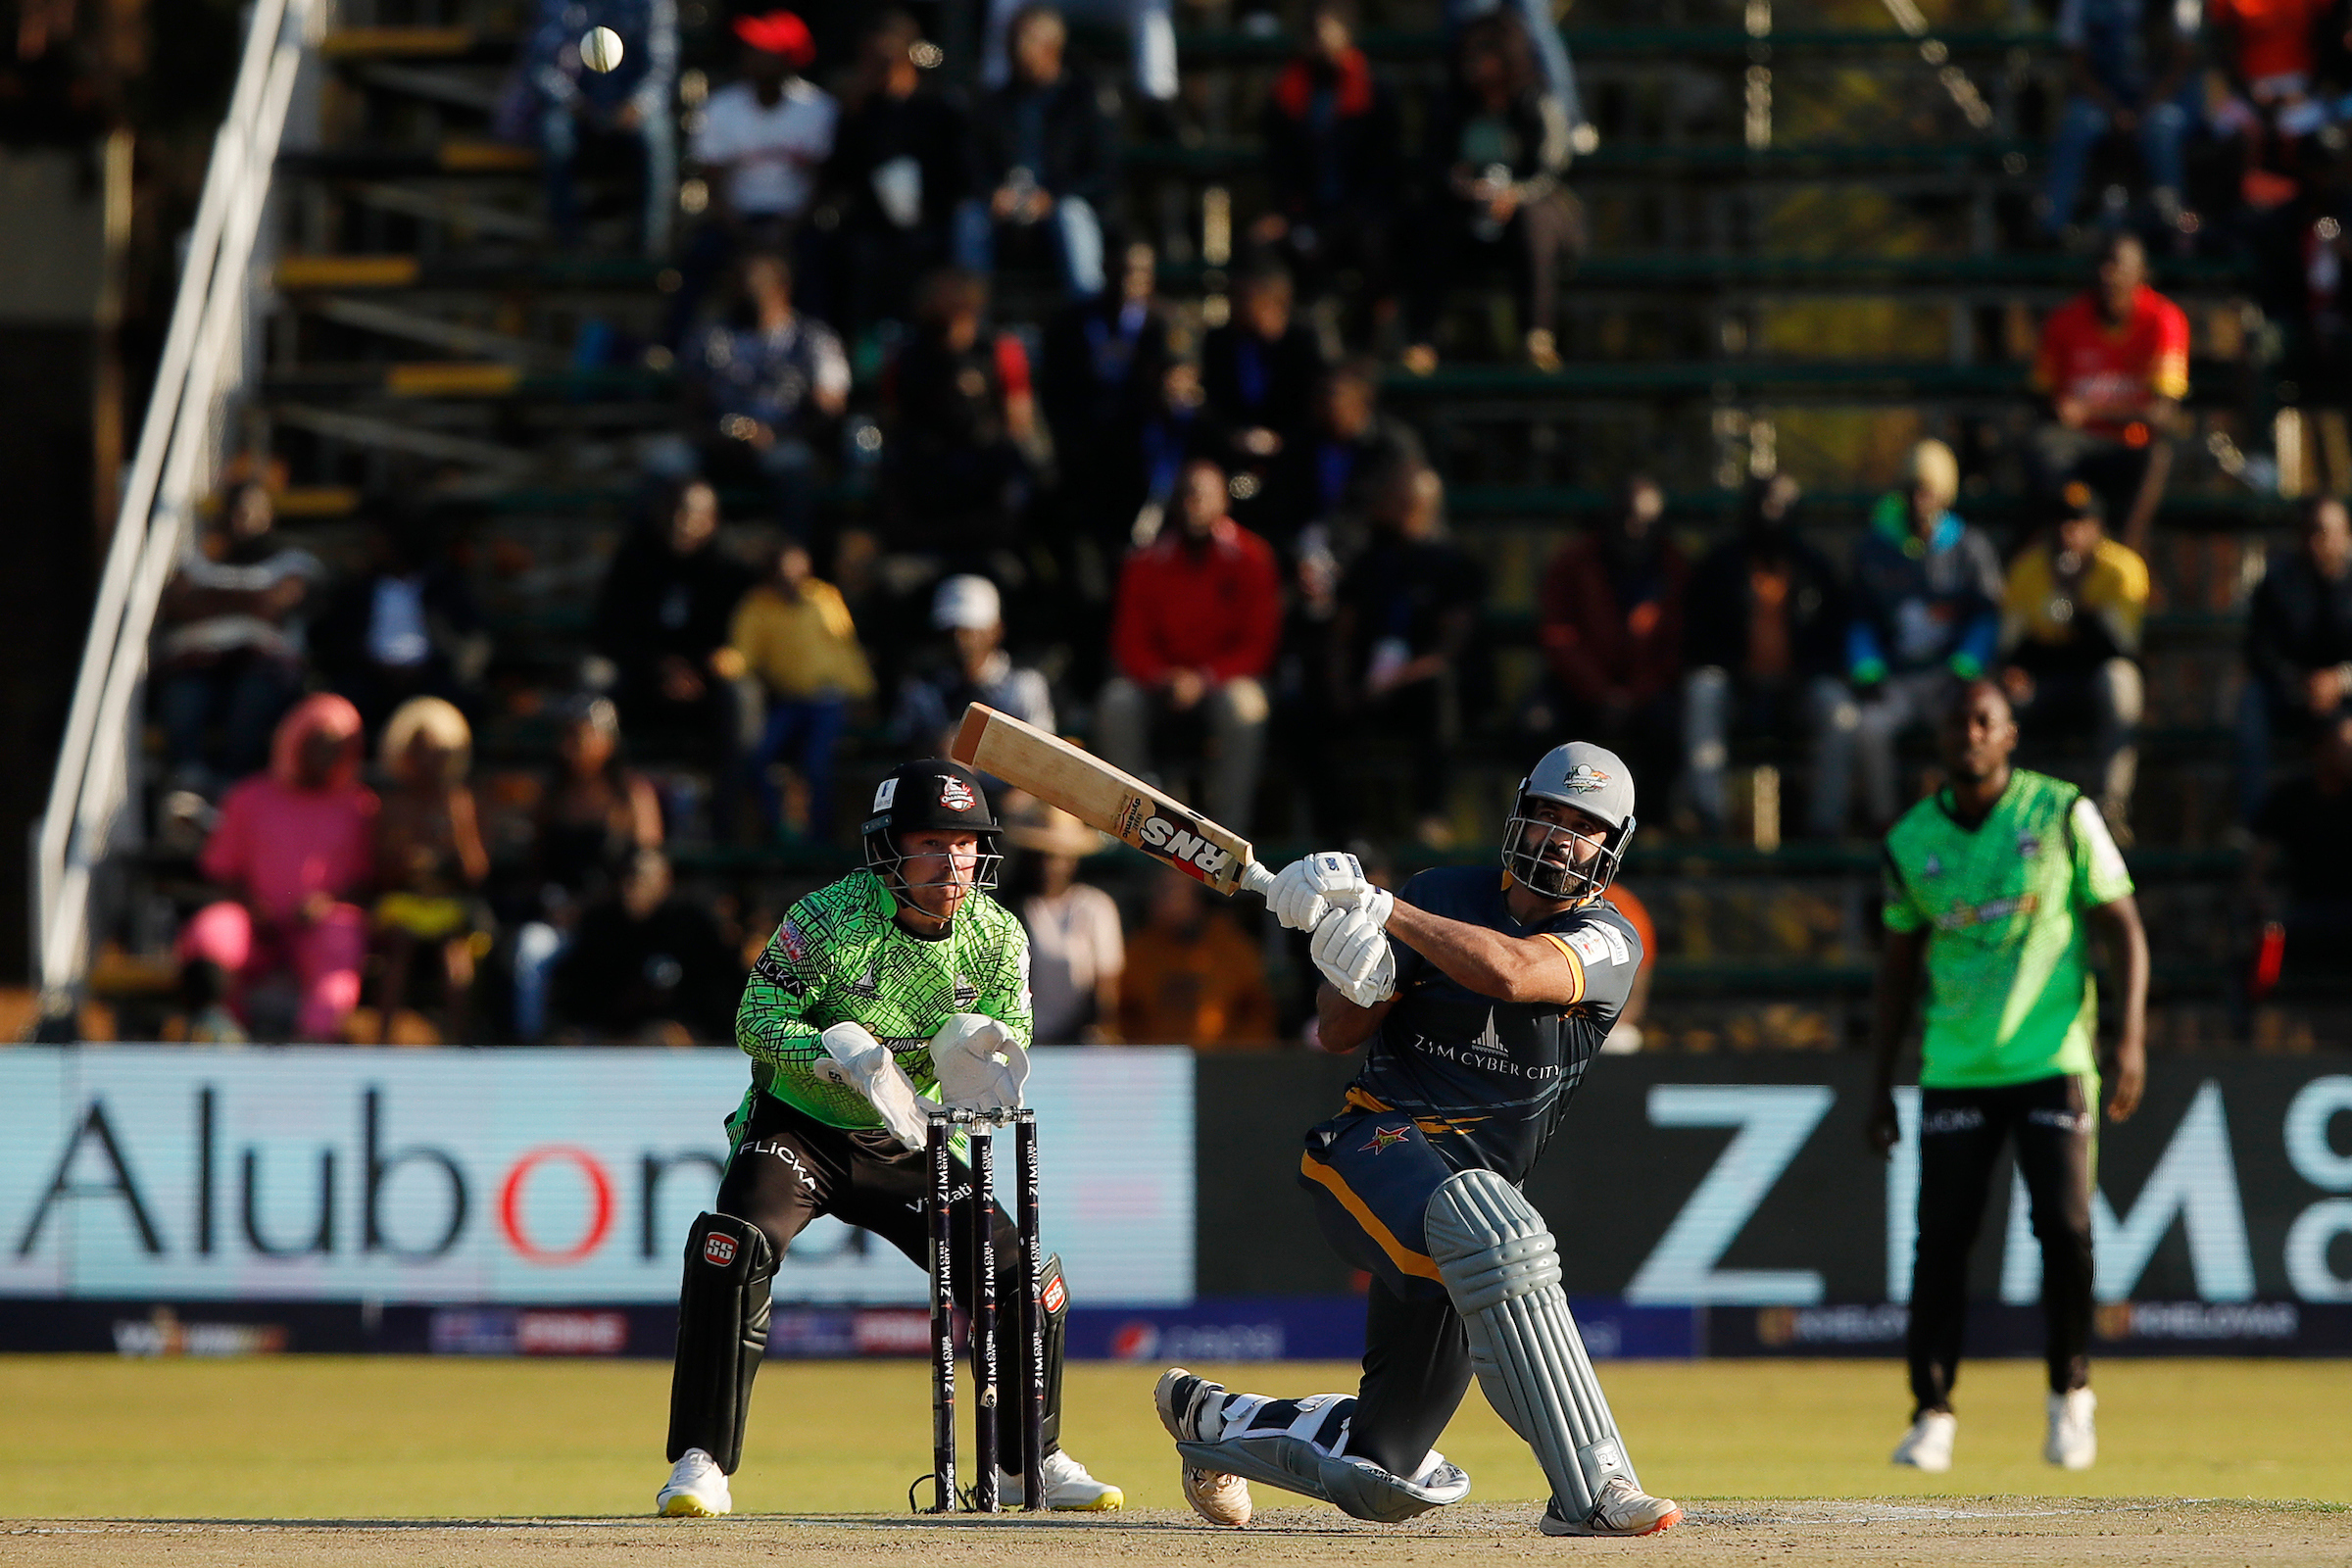 Harare Hurricanes Register First Win at Zim Cyber City Zim Afro T10, Defeat Durban Qalandars